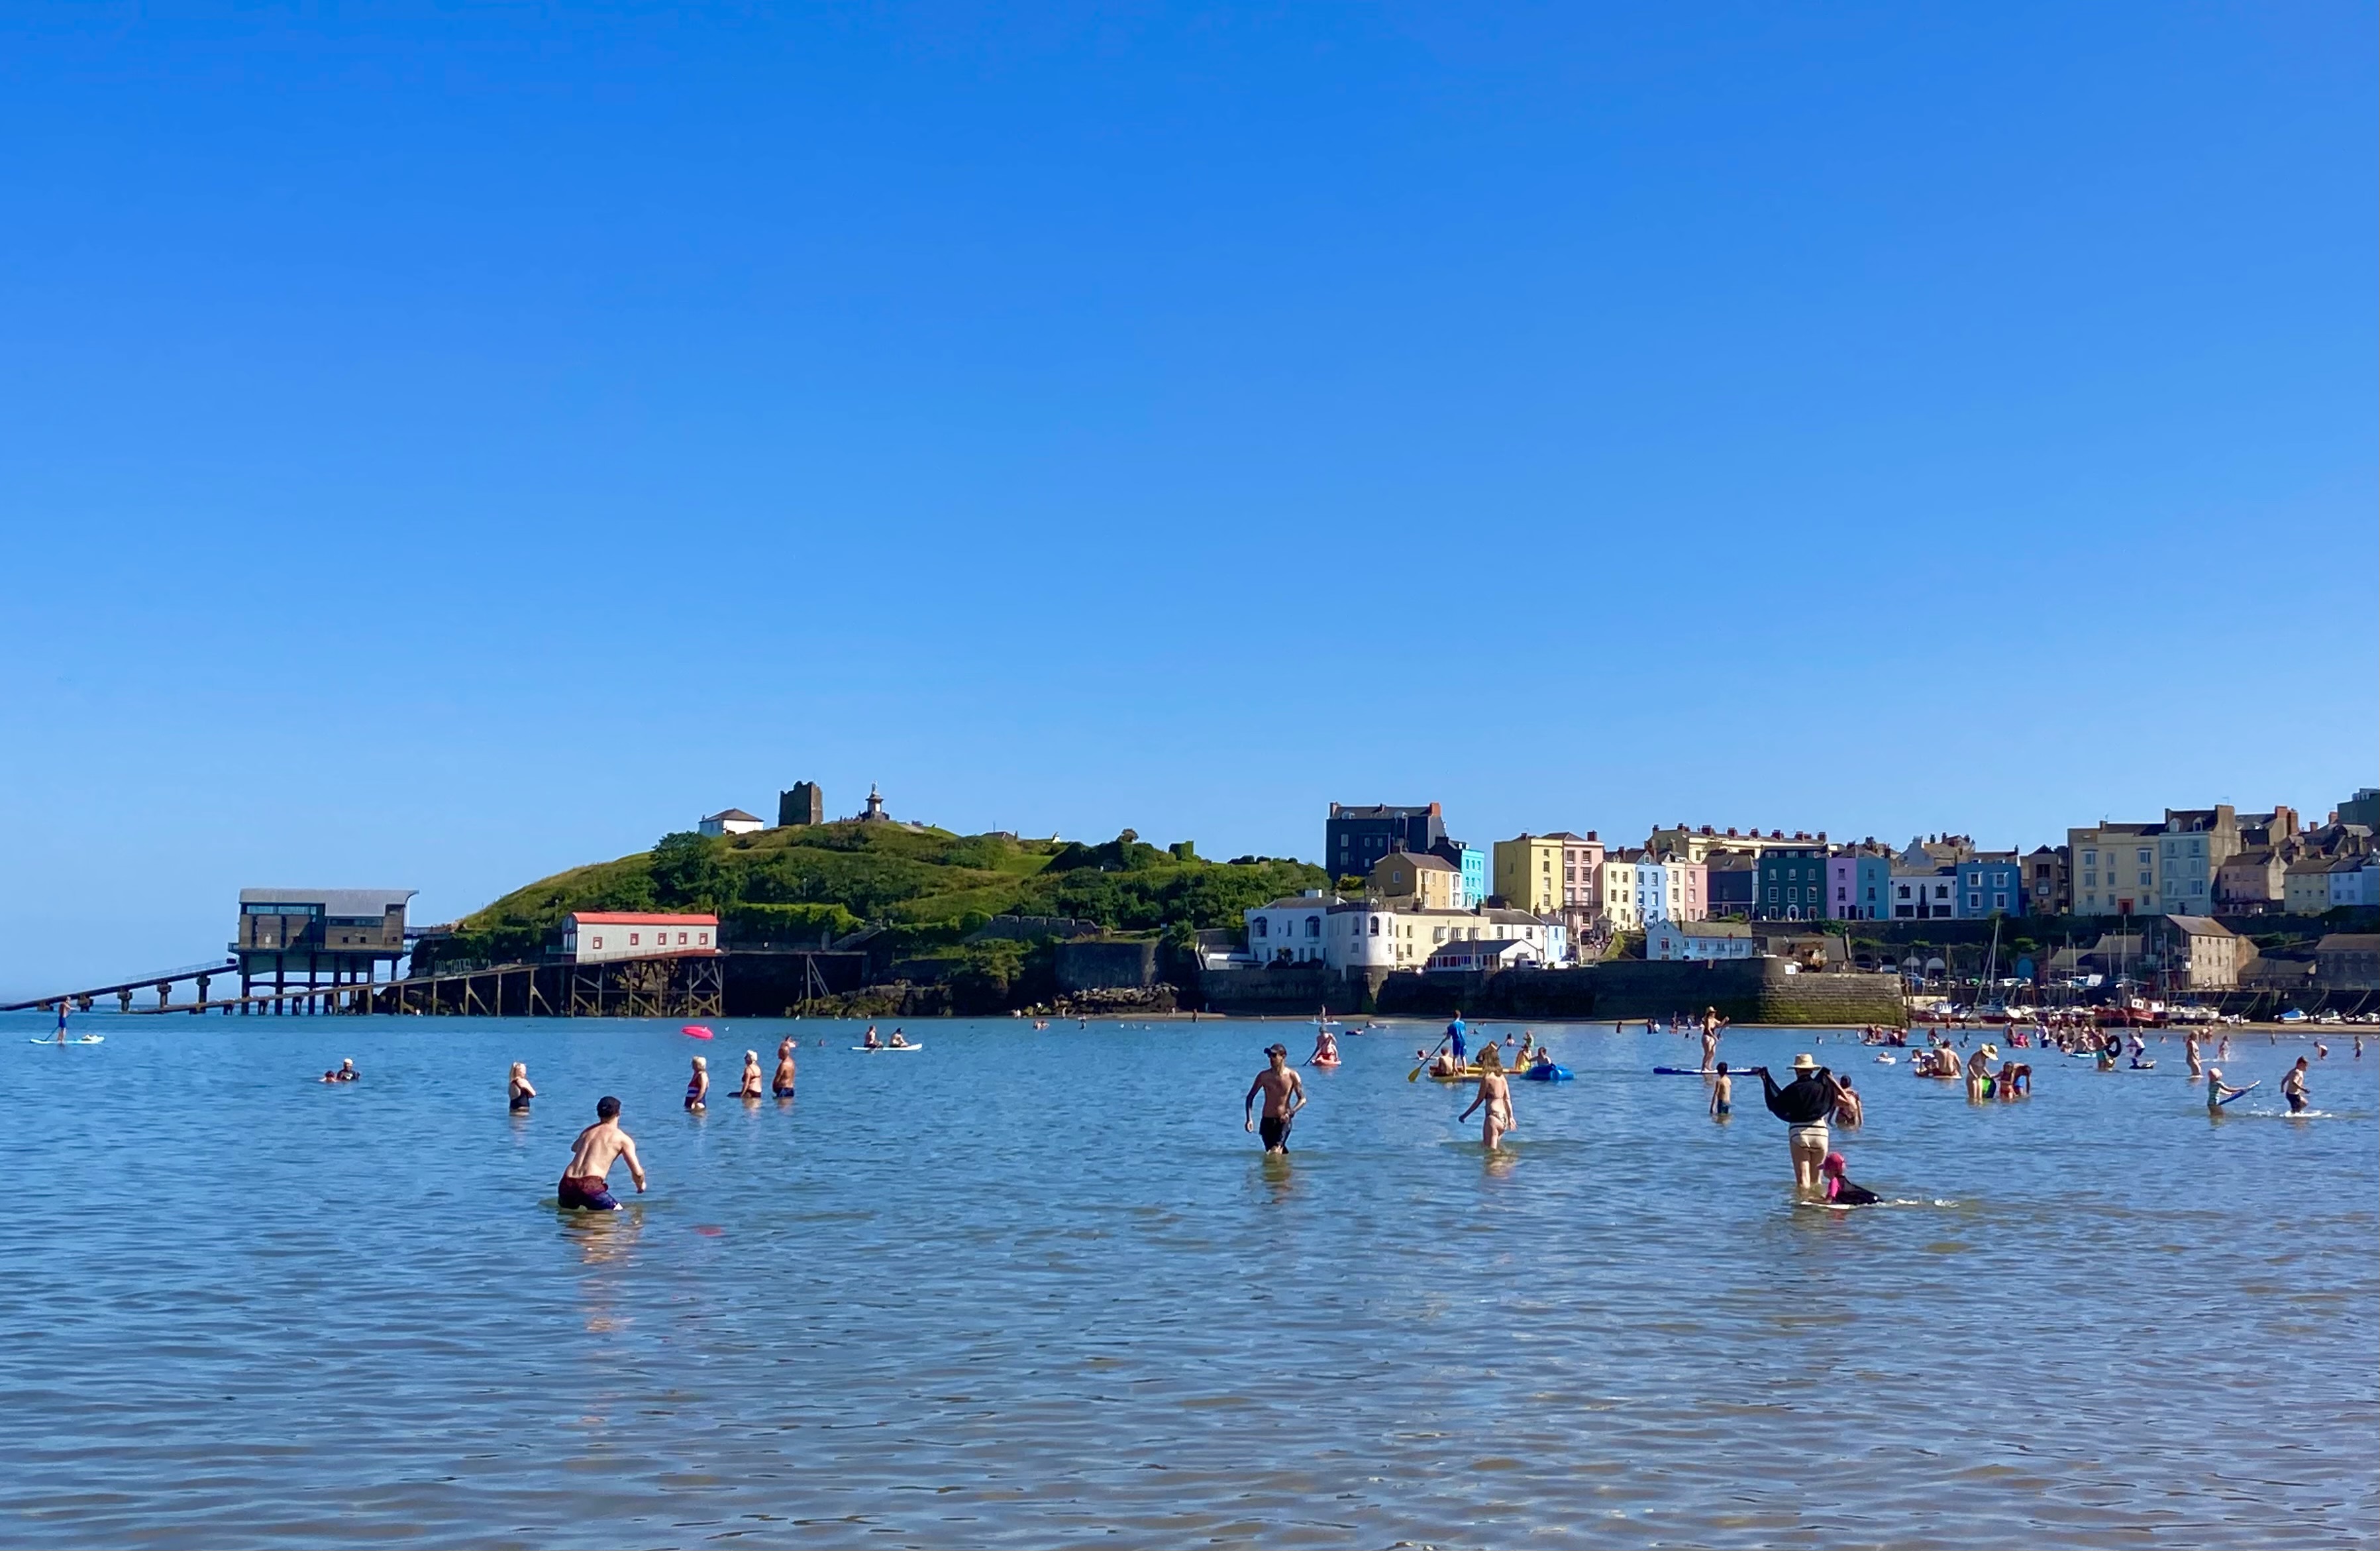 Pollution risk warning issued for all of Tenby's beaches